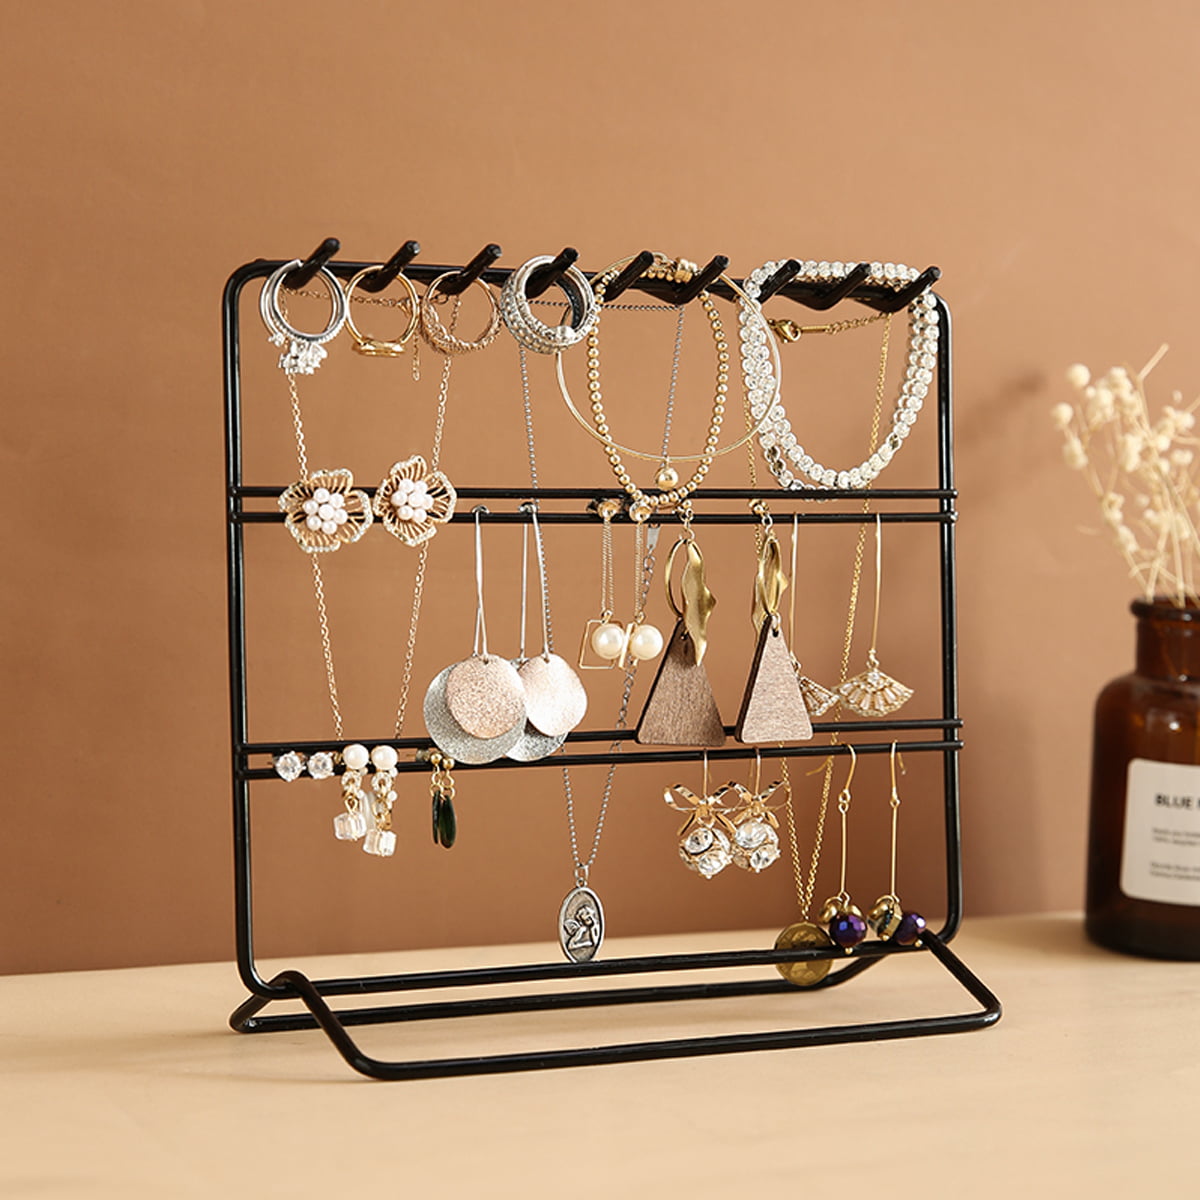 Jewelry holders for you